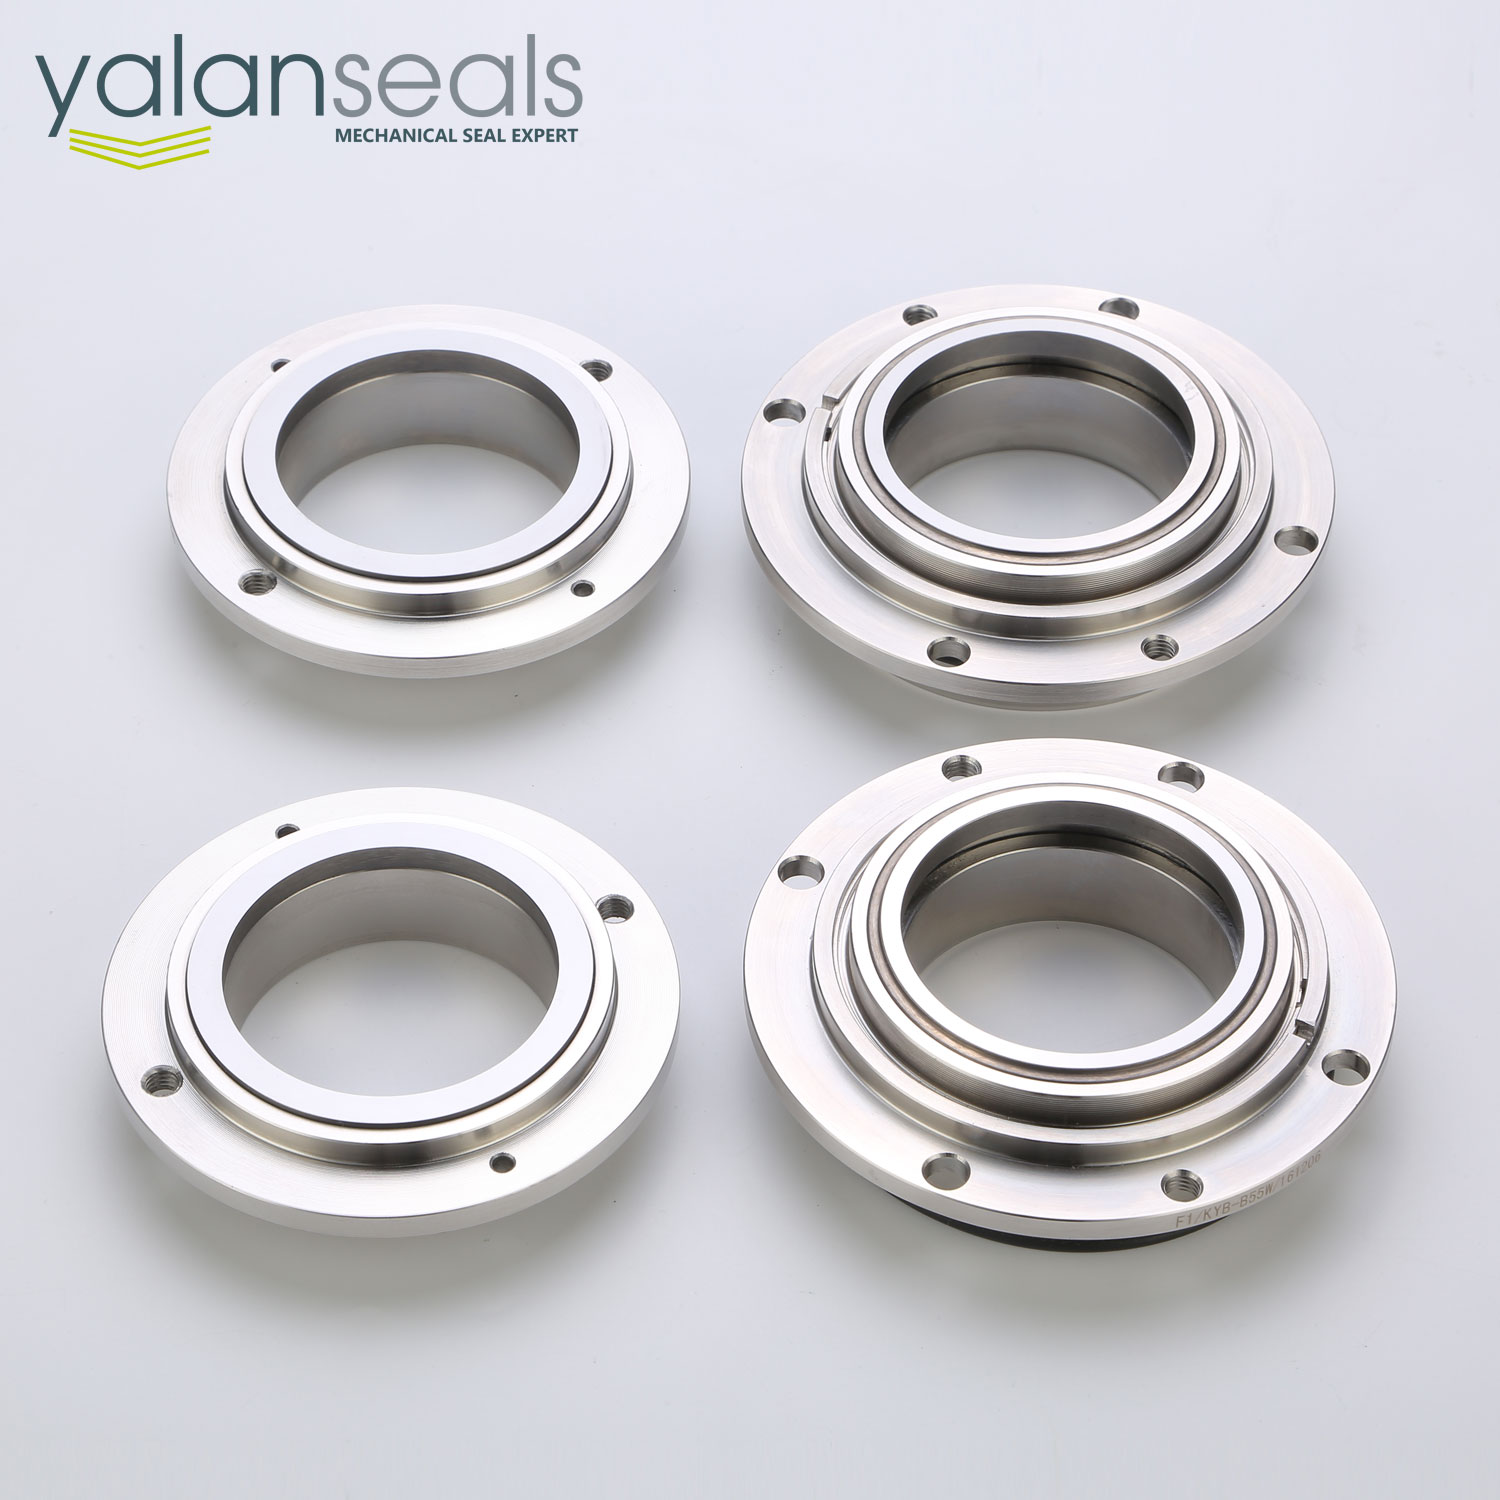 YALAN 10J-10D High Speed Mechanical Seals for Blowers, High Speed Pumps and Compressors